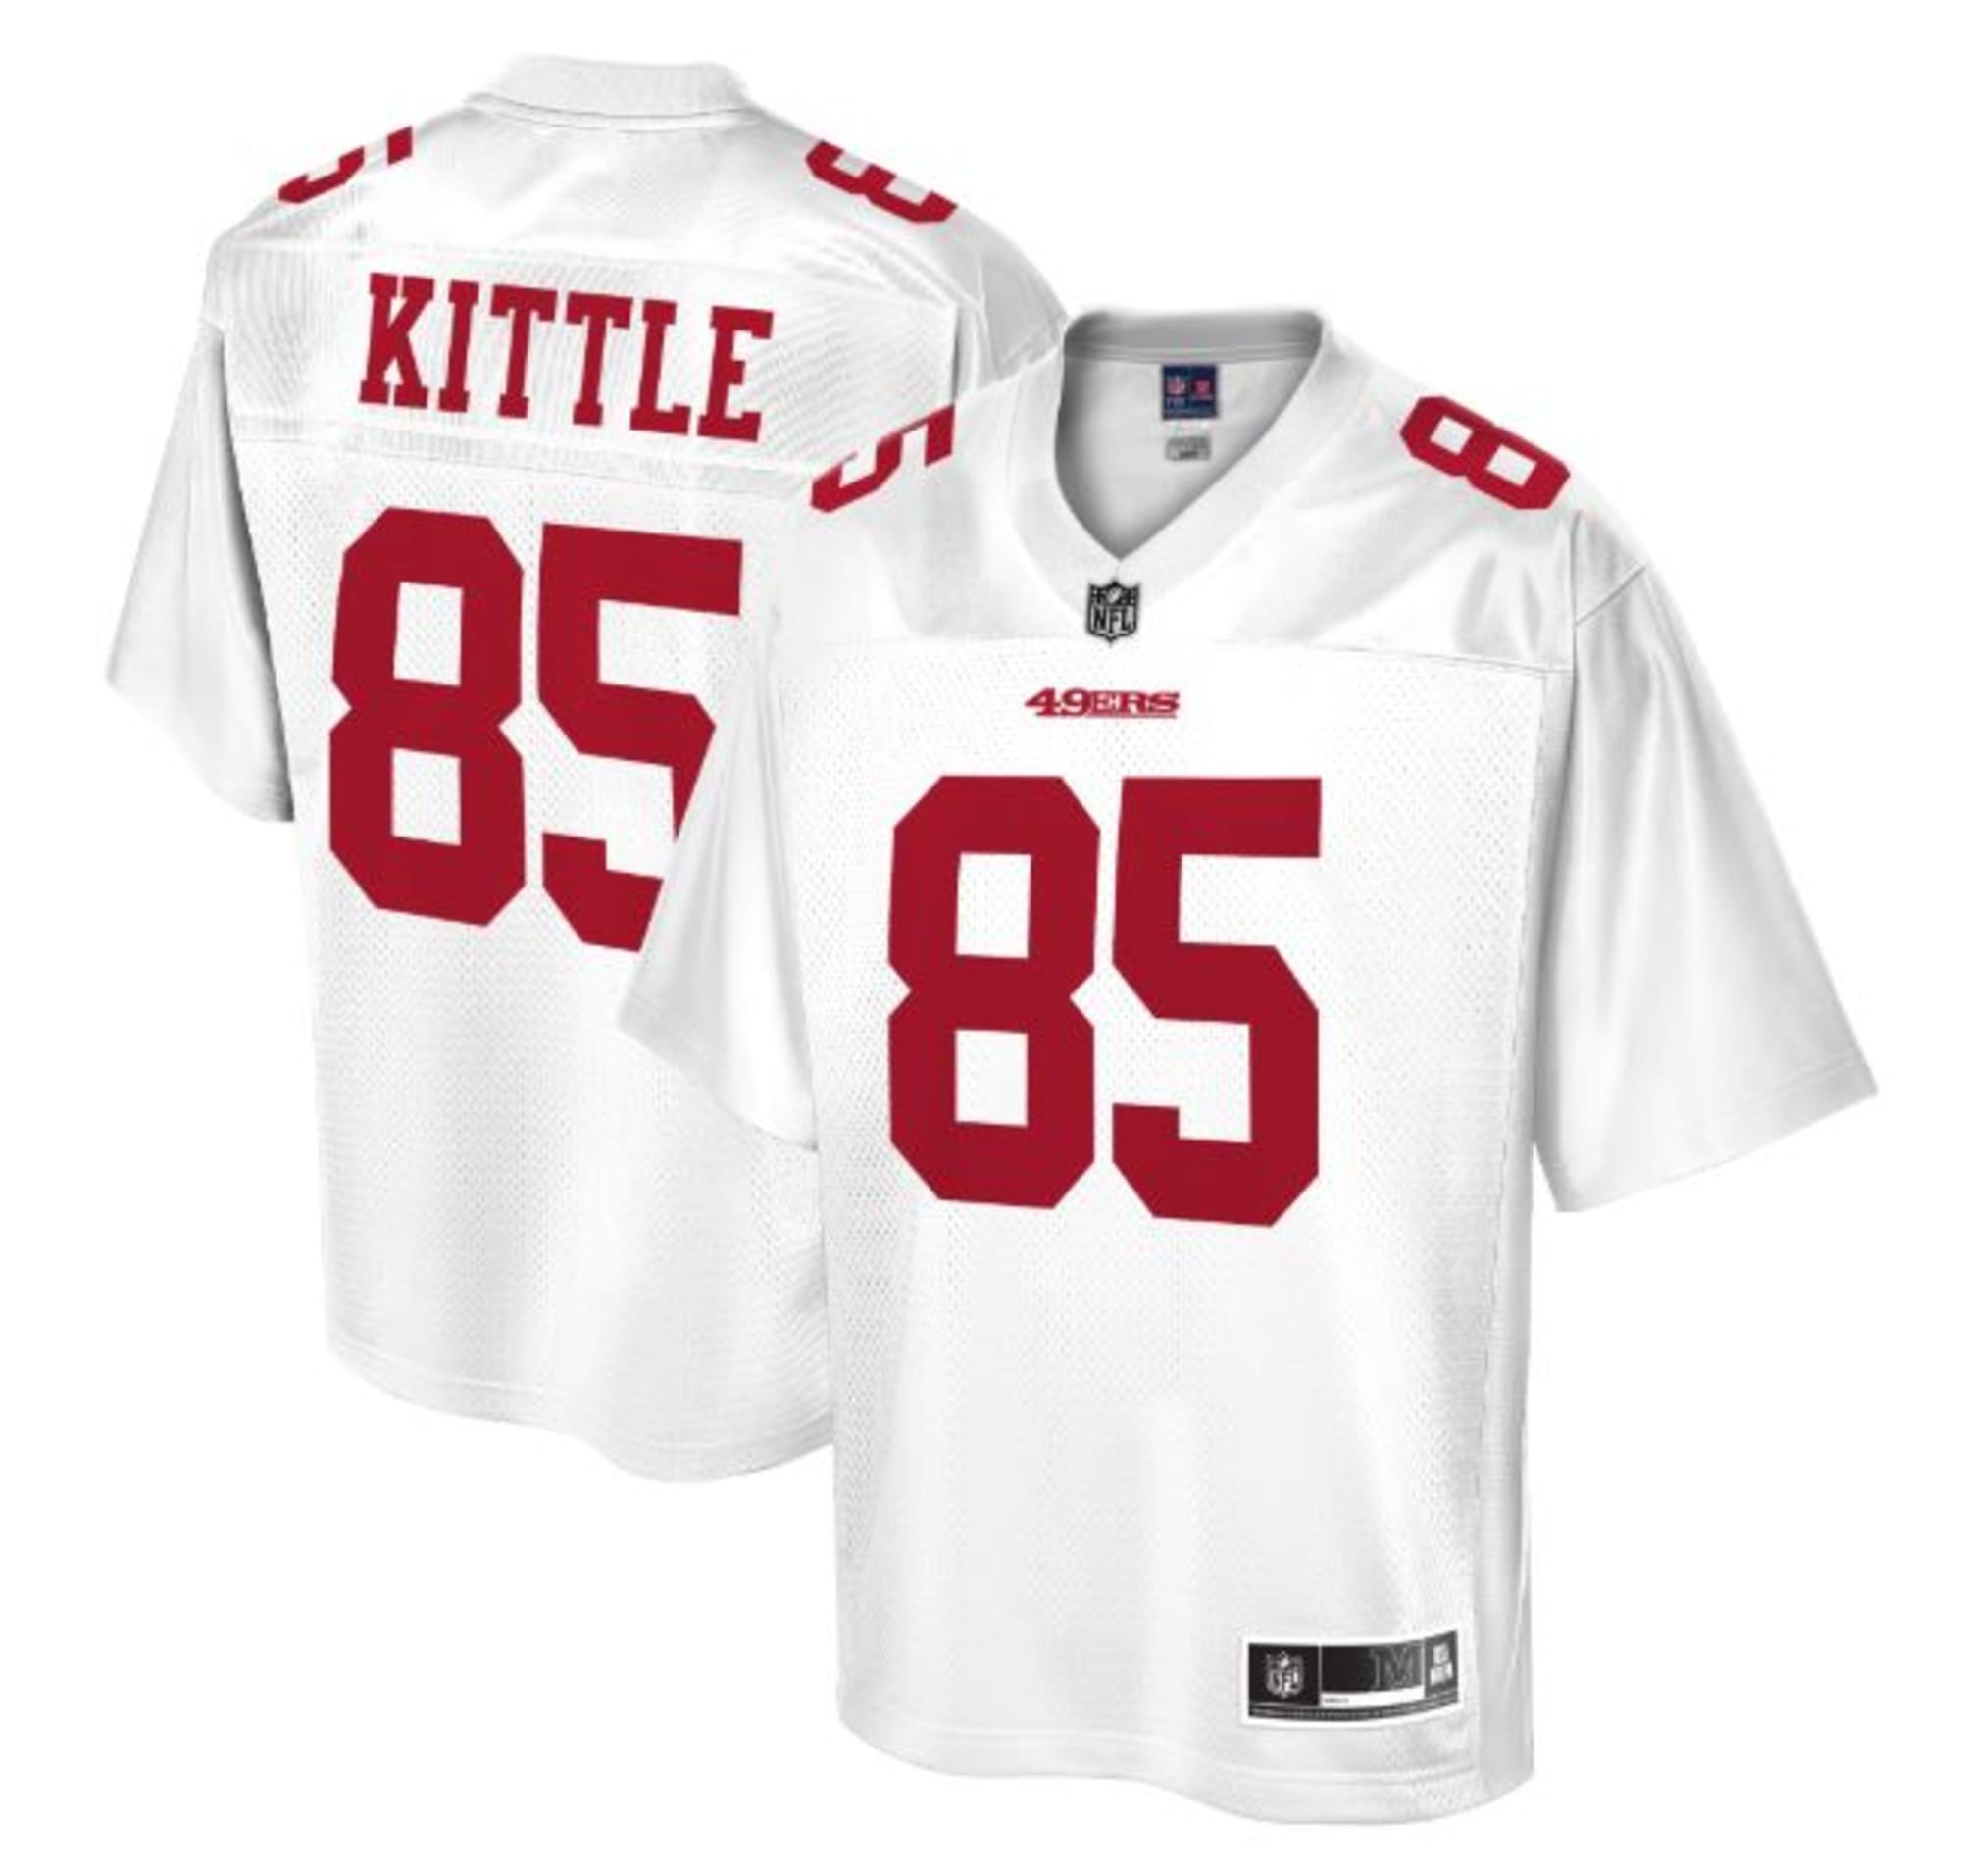 49ers white jersey